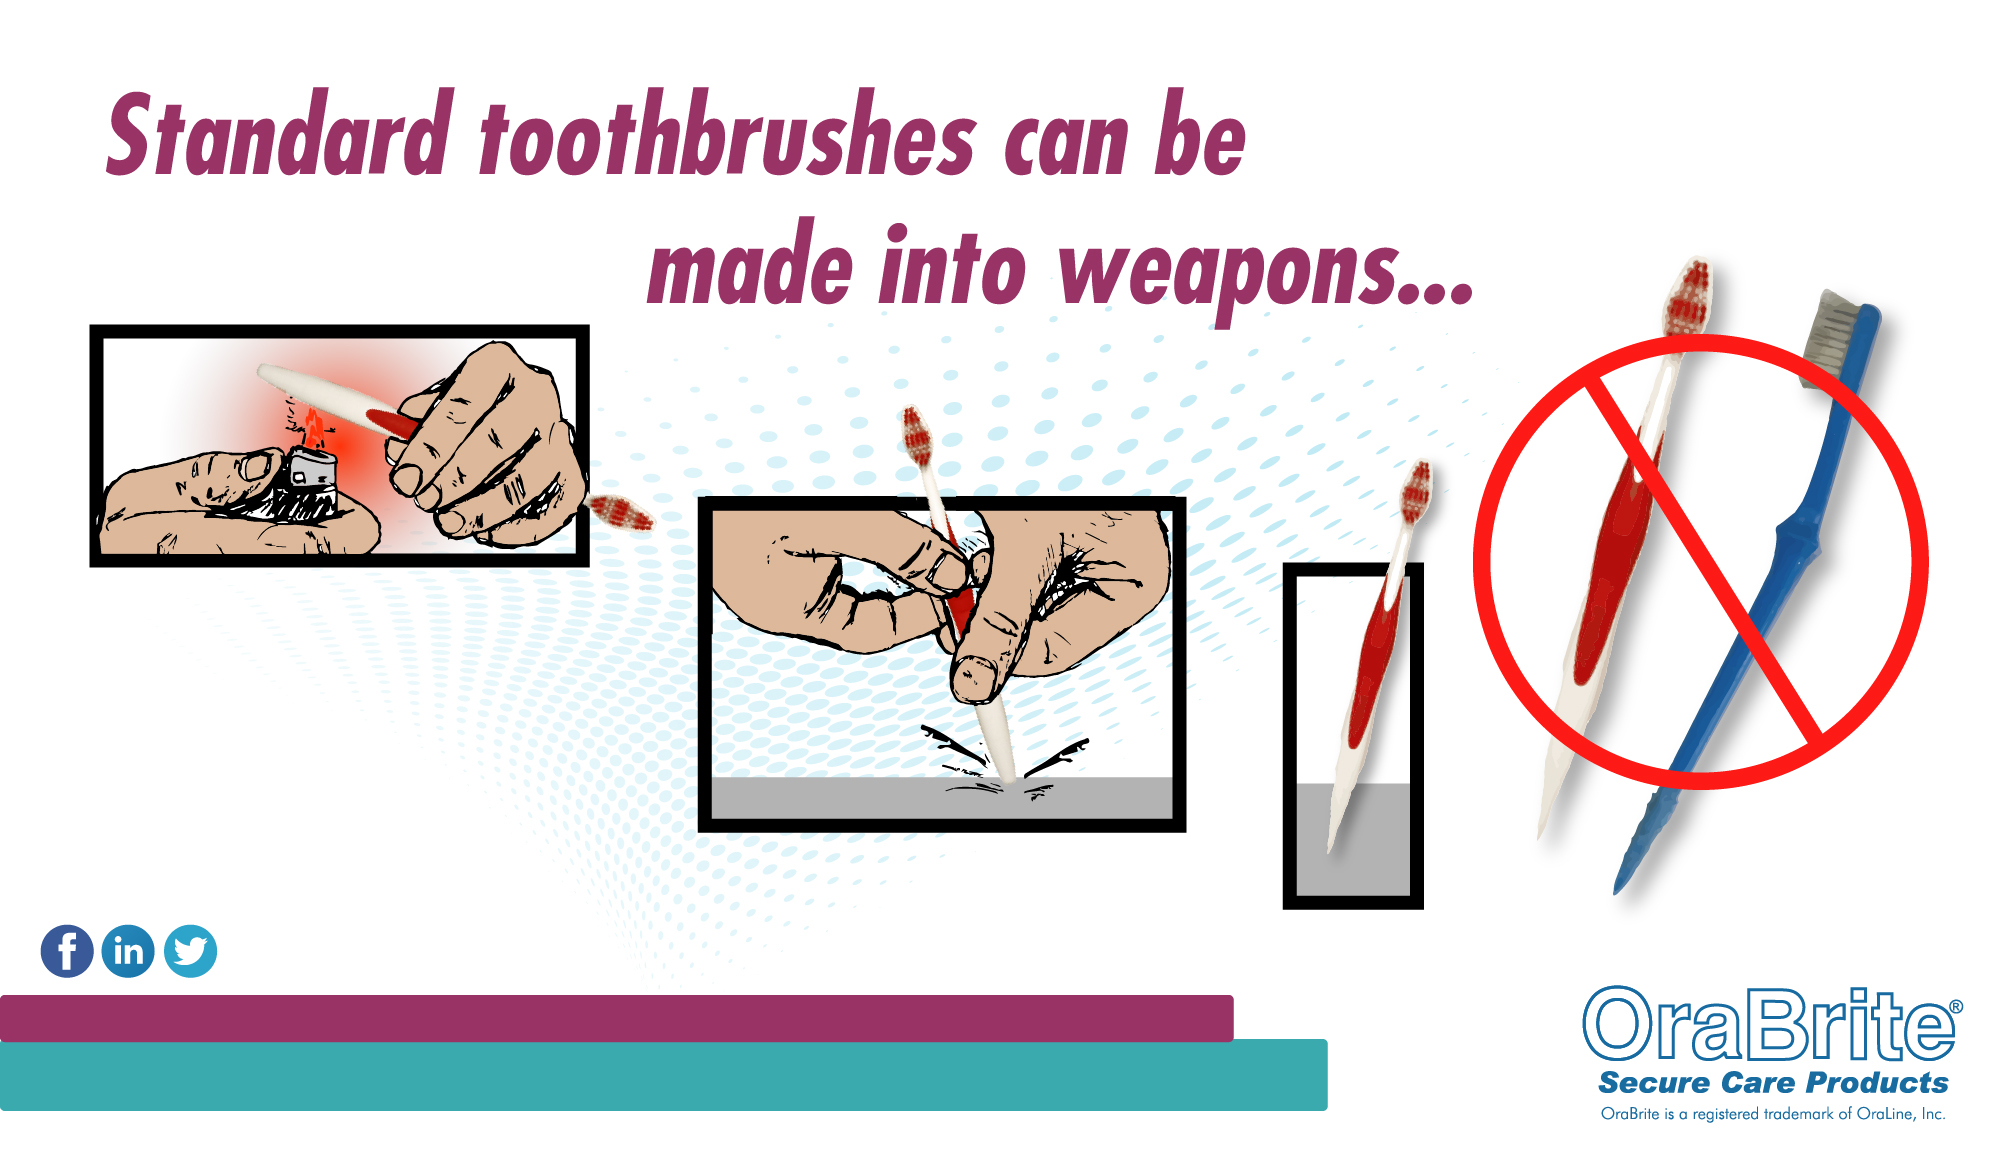 Standard toothbrushes can be made into weapons...